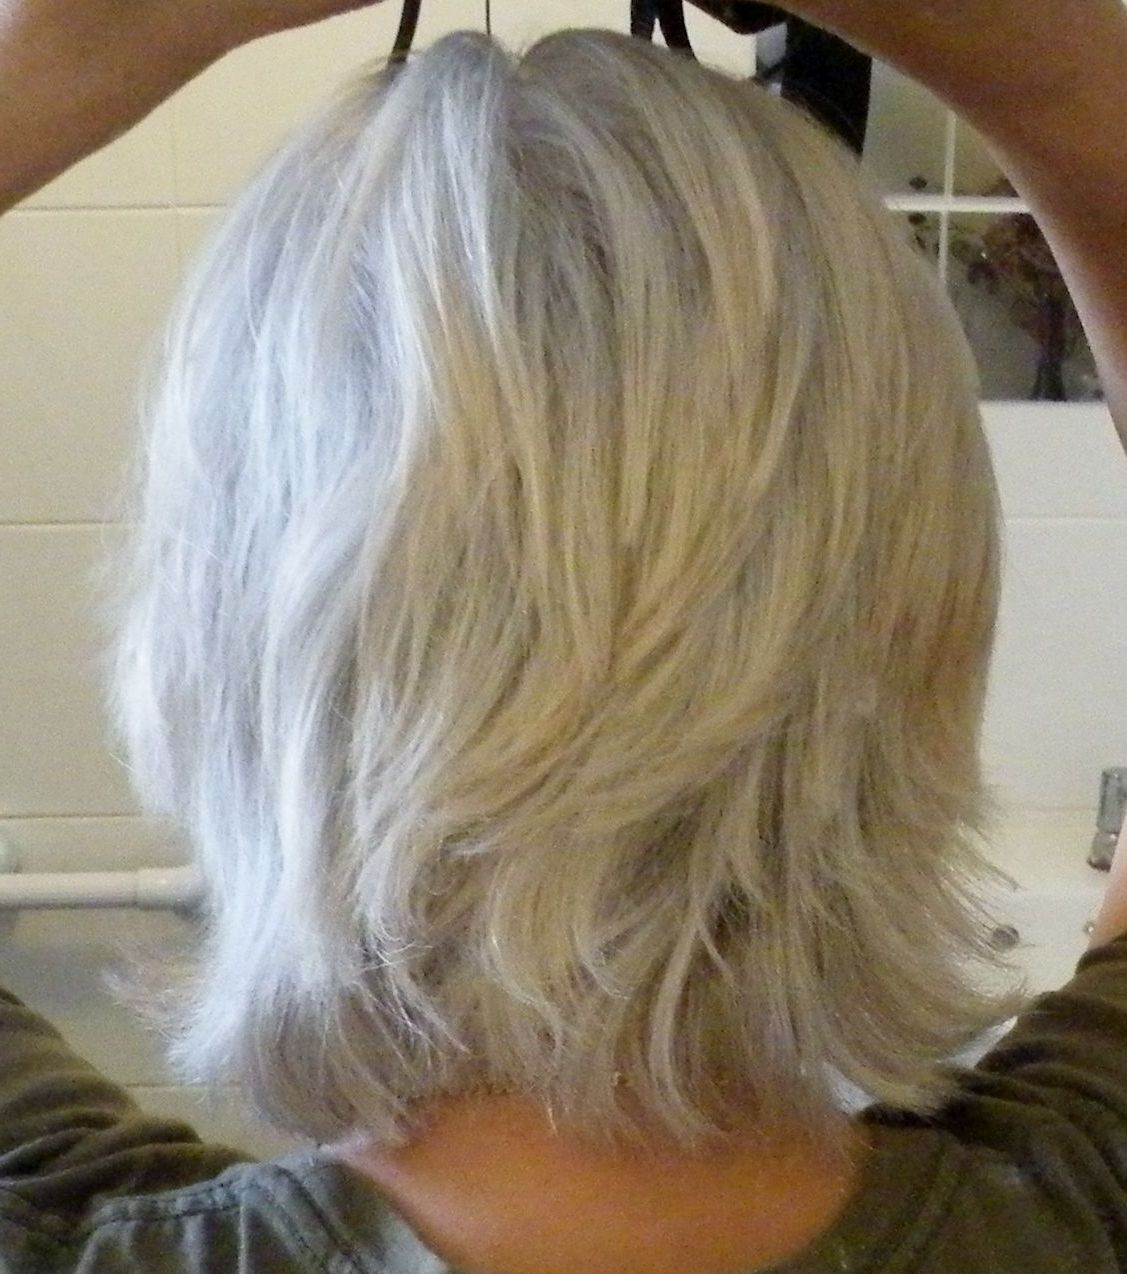 Possible Short Ish Cut For When The Growing Out Phase Is Driving Me With Recent Medium Haircuts With Gray Hair (View 16 of 20)